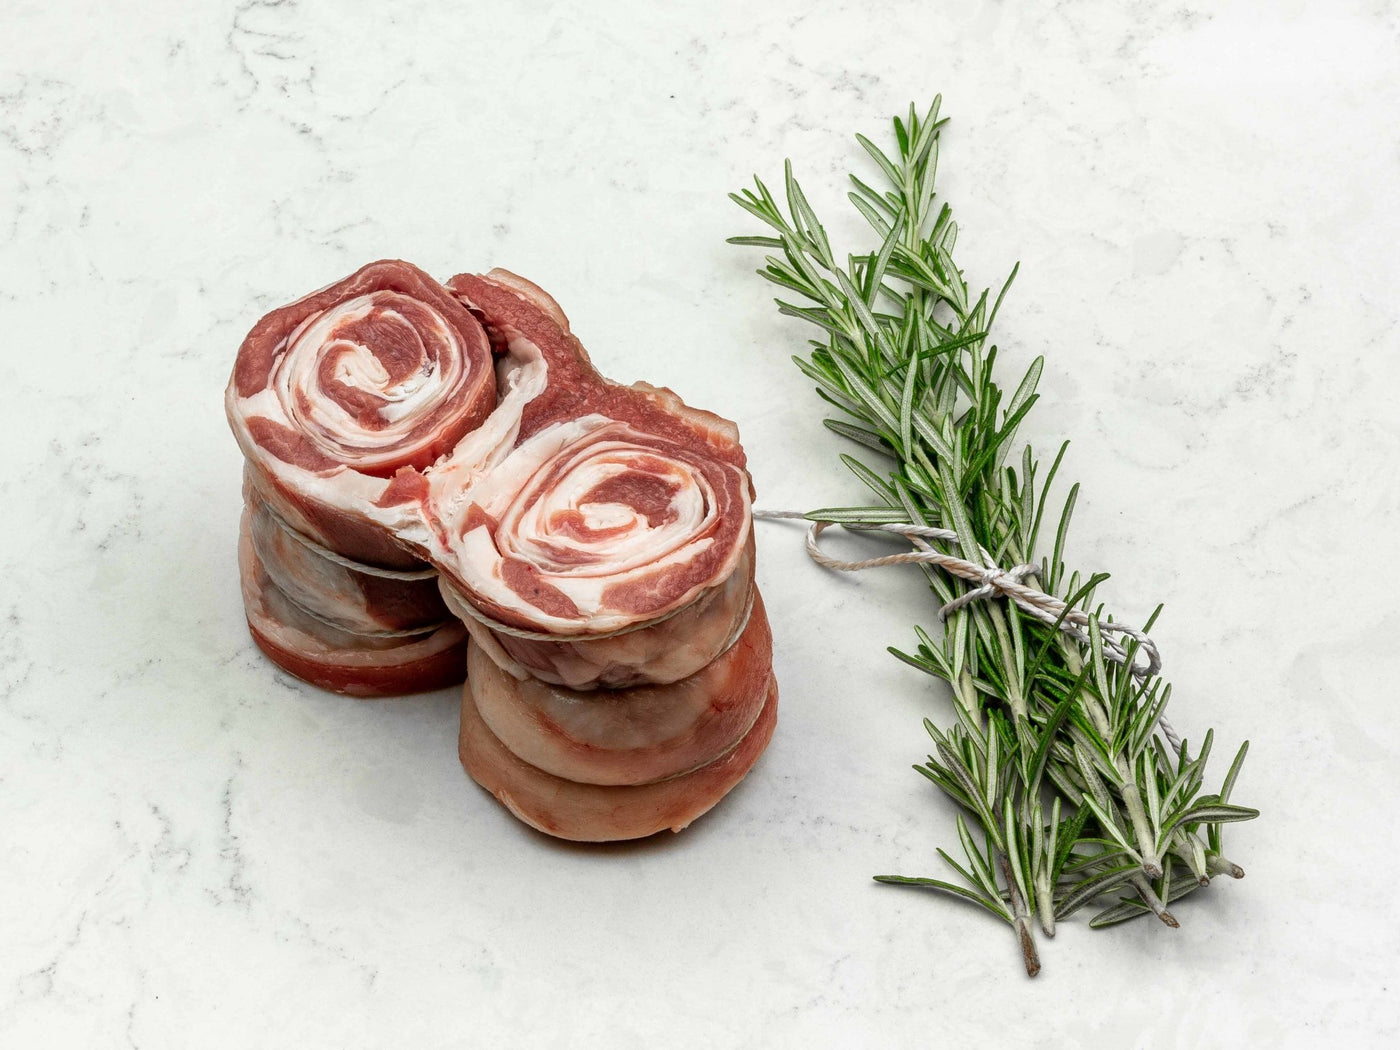 Breast of Lamb - Boned and Rolled - Lamb - Thomas Joseph Butchery - Ethical Dry-Aged Meat The Best Steak UK Thomas Joseph Butchery